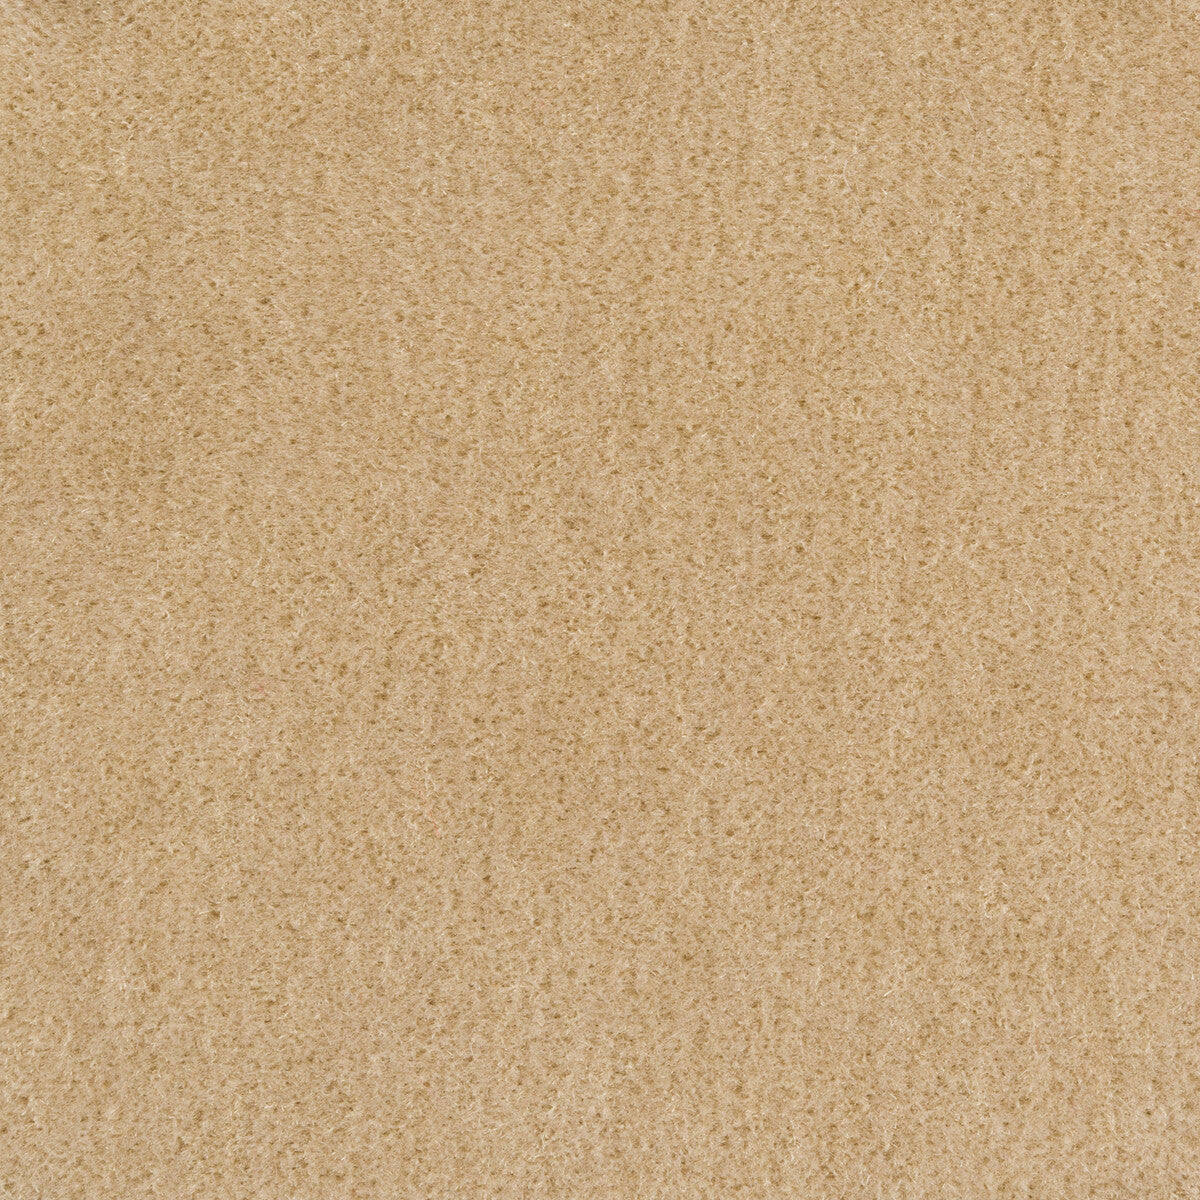 Windsor Mohair fabric in hush color - pattern 34258.1.0 - by Kravet Couture